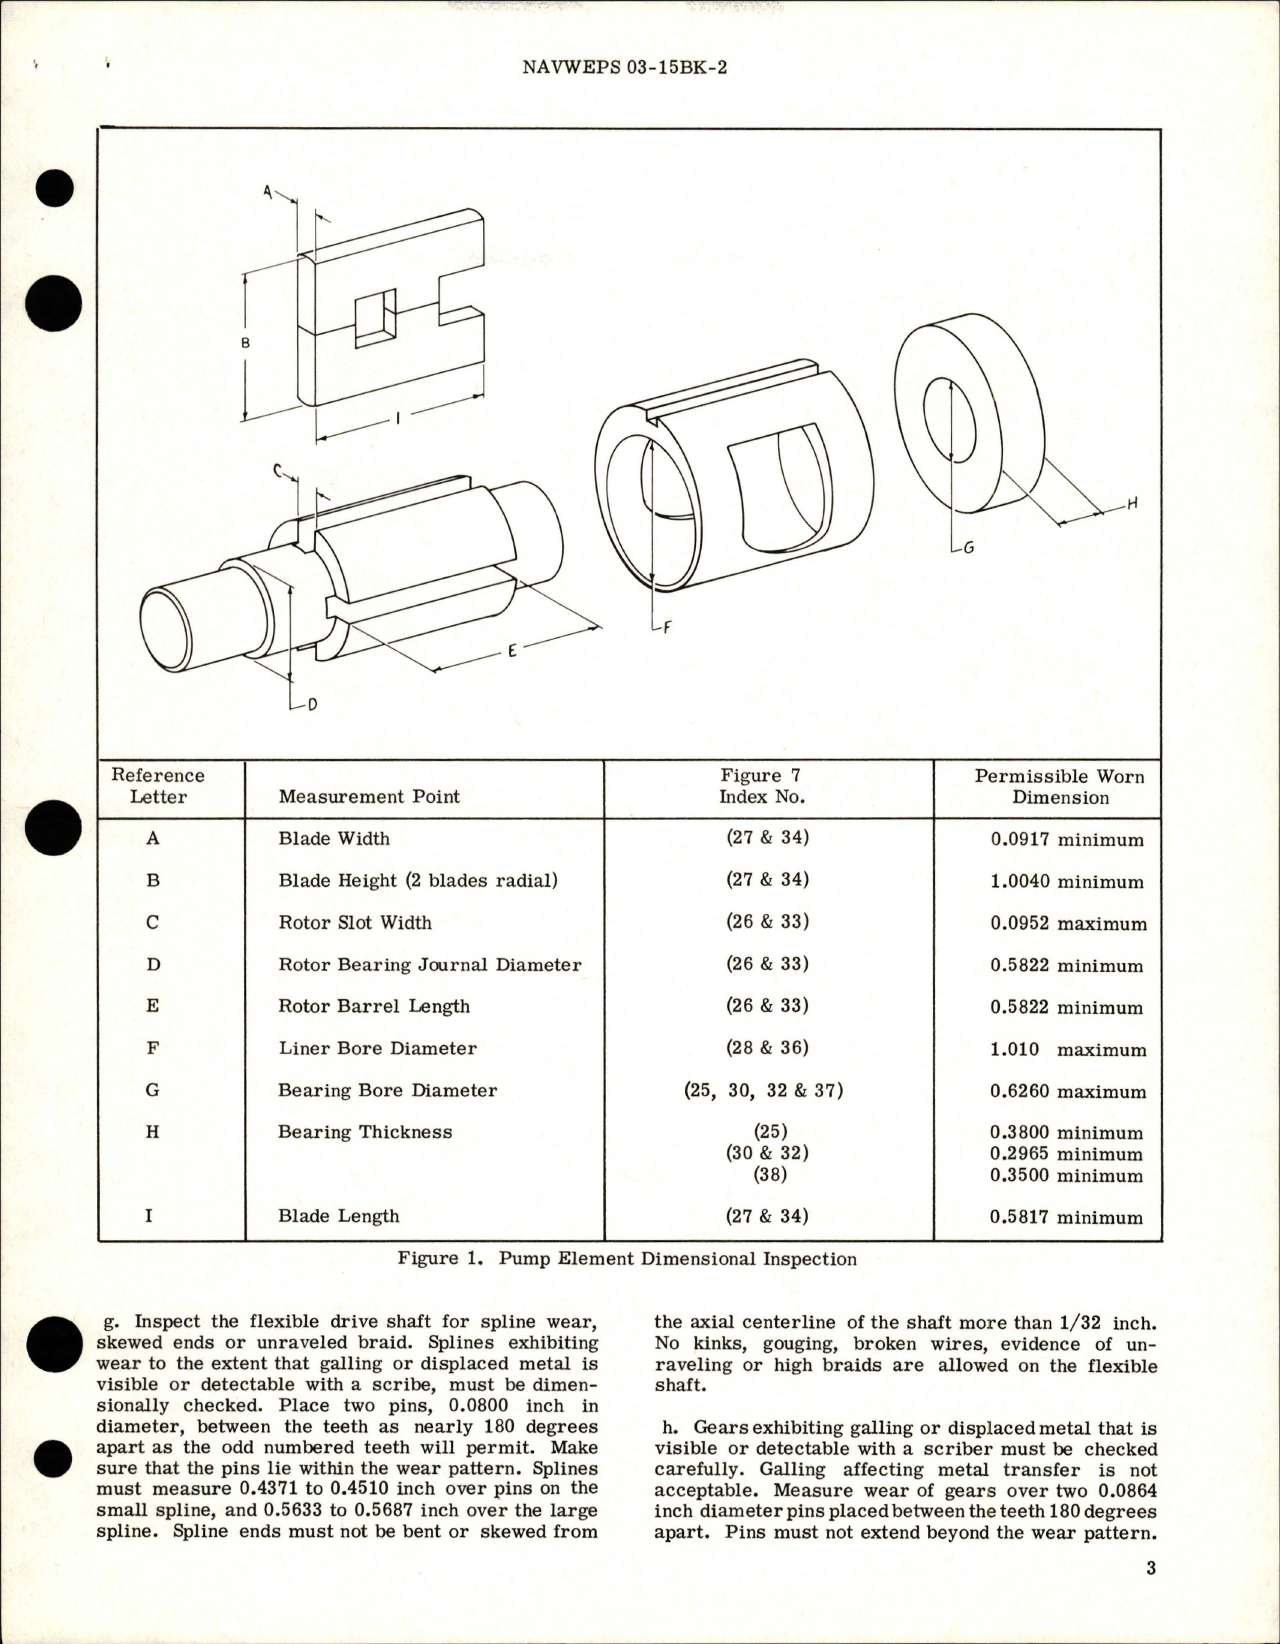 Sample page 5 from AirCorps Library document: Overhaul Instructions with Parts Breakdown for Power Driven Rotary Pump - Model RR17800